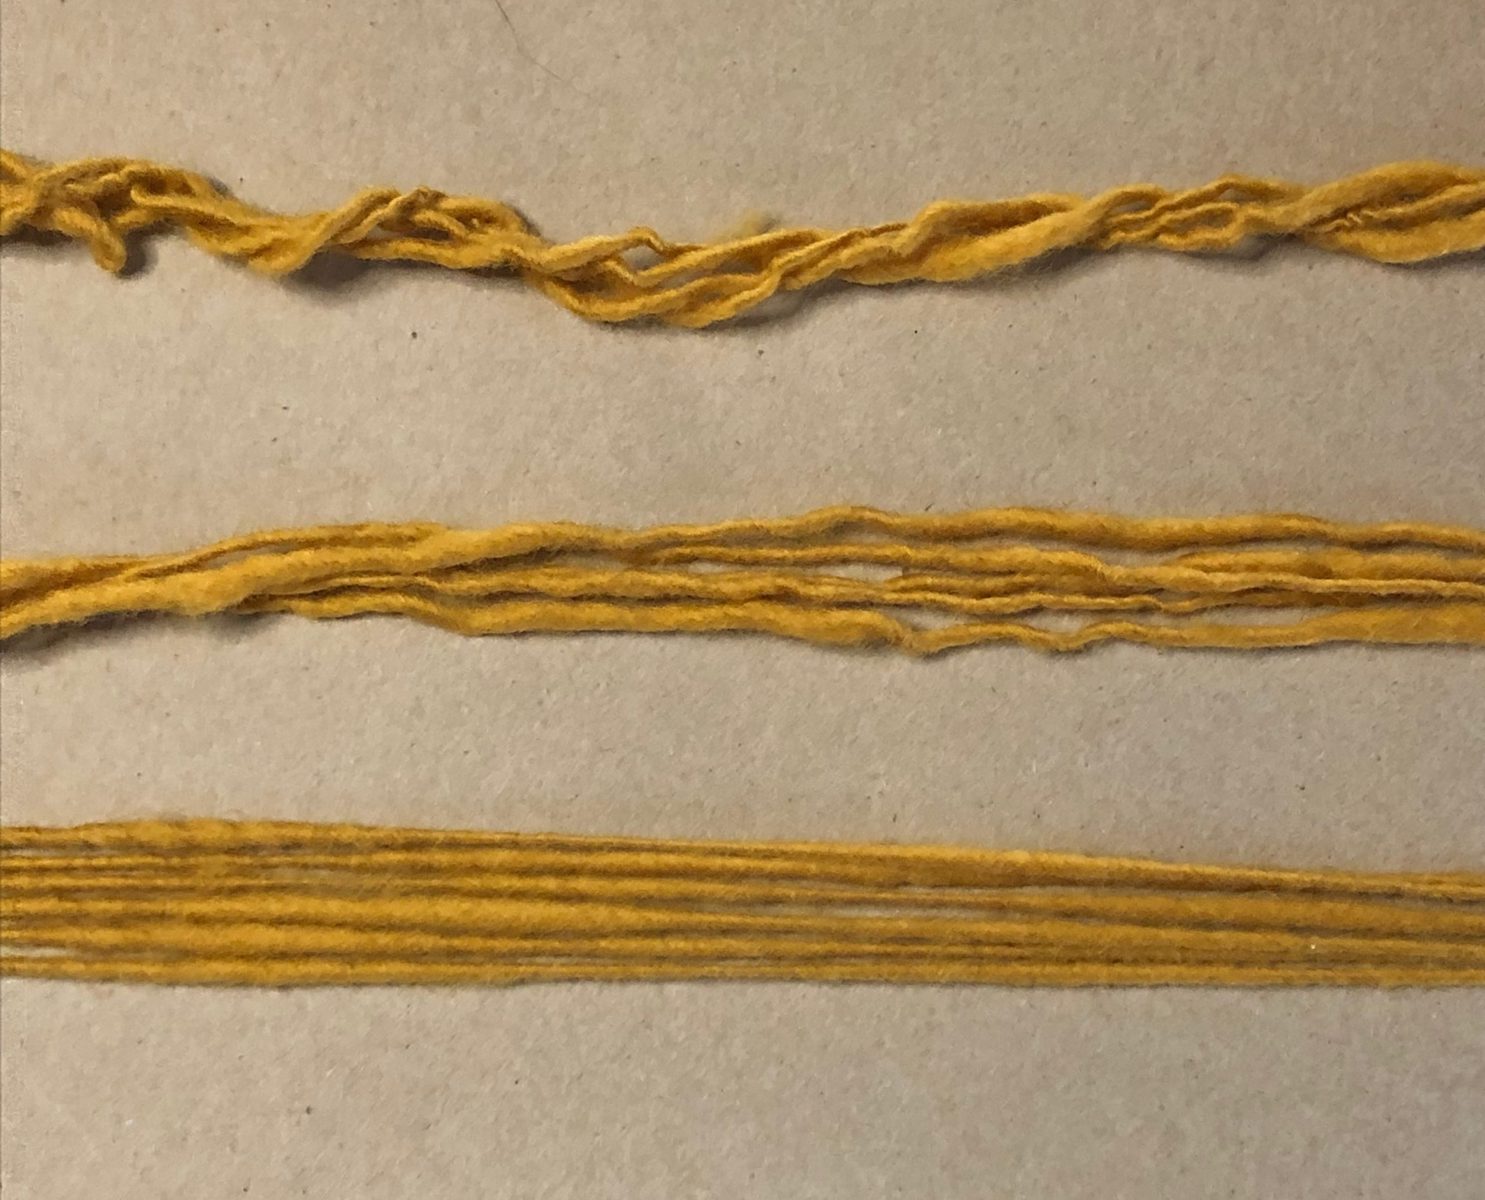 image description: close up of three different groups of yarn strands; the upper ones are very kinky and coiled; the middle ones less so; the bottom ones are very smooth